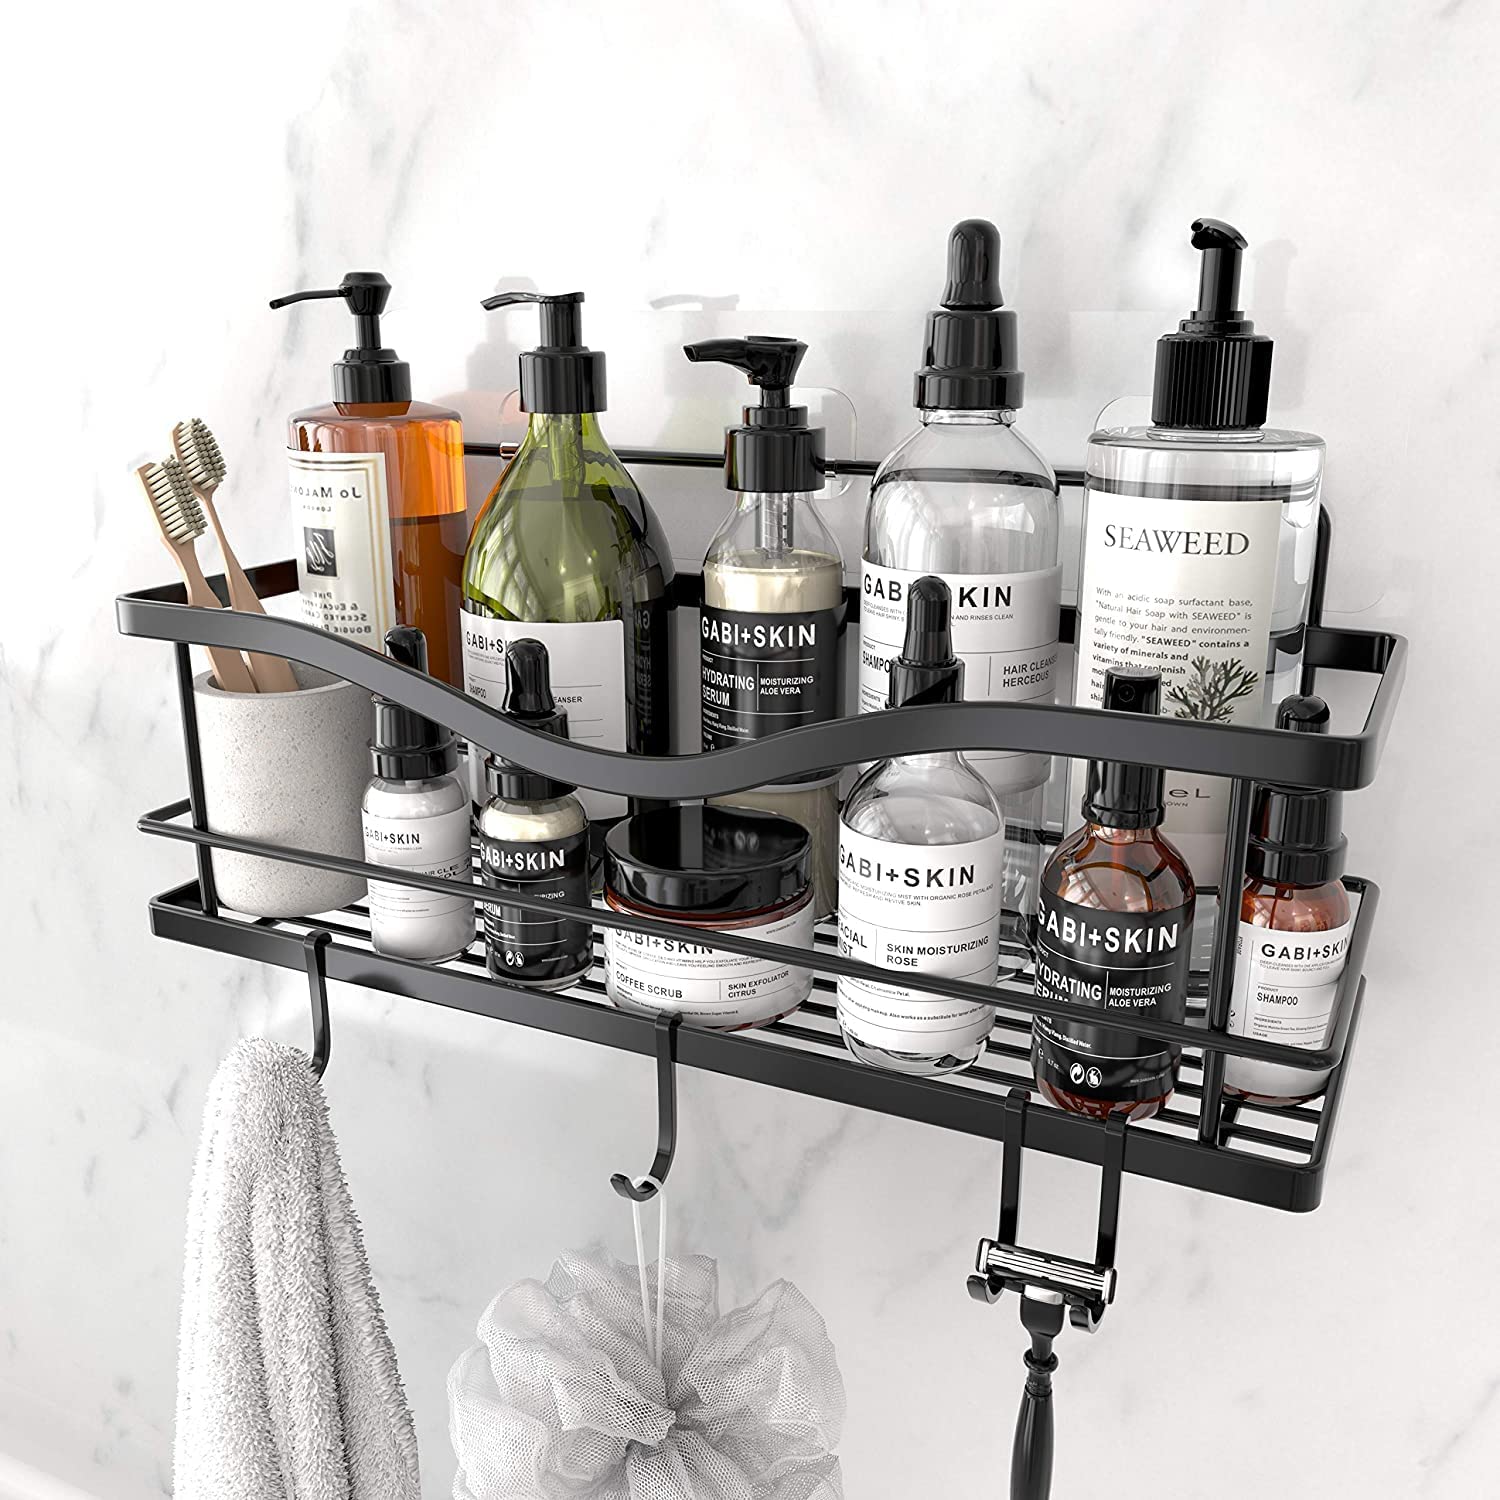 https://bigbigmart.com/wp-content/uploads/2021/10/KINCMAX-Shower-Caddy-Basket-Shelf-with-Hooks-Caddy-Organizer-Wall-Mounted-Rustproof-Basket-with-Adhesive-No-Drilling-304-Stainless-Steel-Storage-Rack-for-Bathroom-Shower-Kitchen-Black%E2%80%A61.jpg